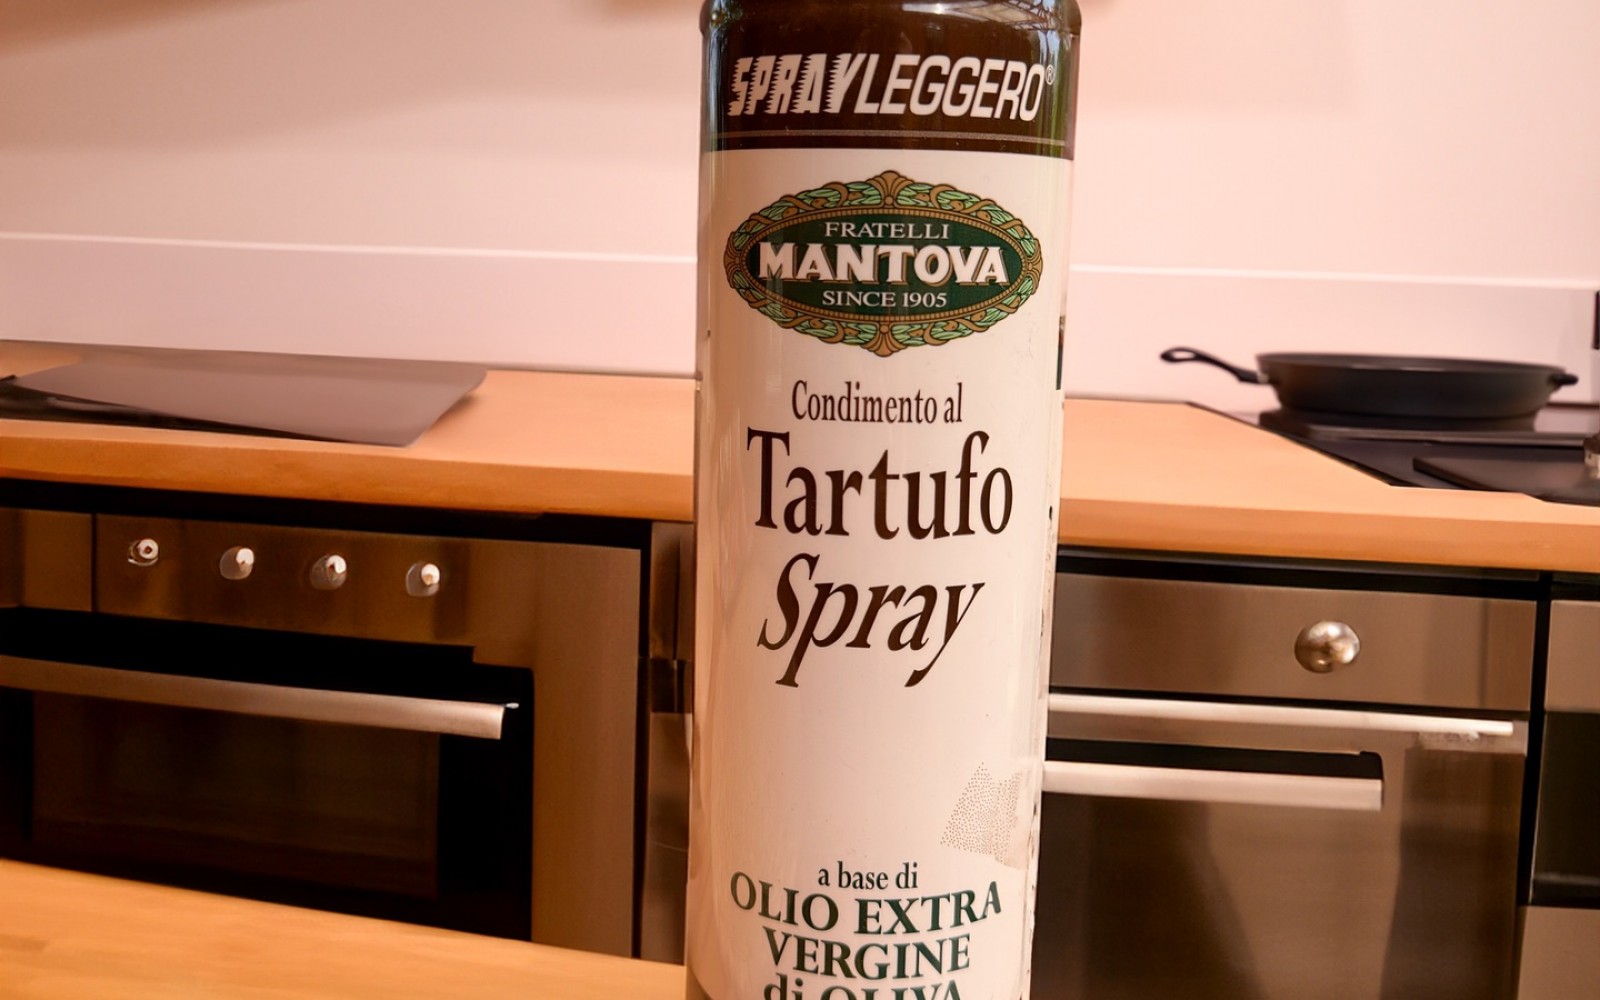 Mantova truffle oil is excellent for flavoring many types of food